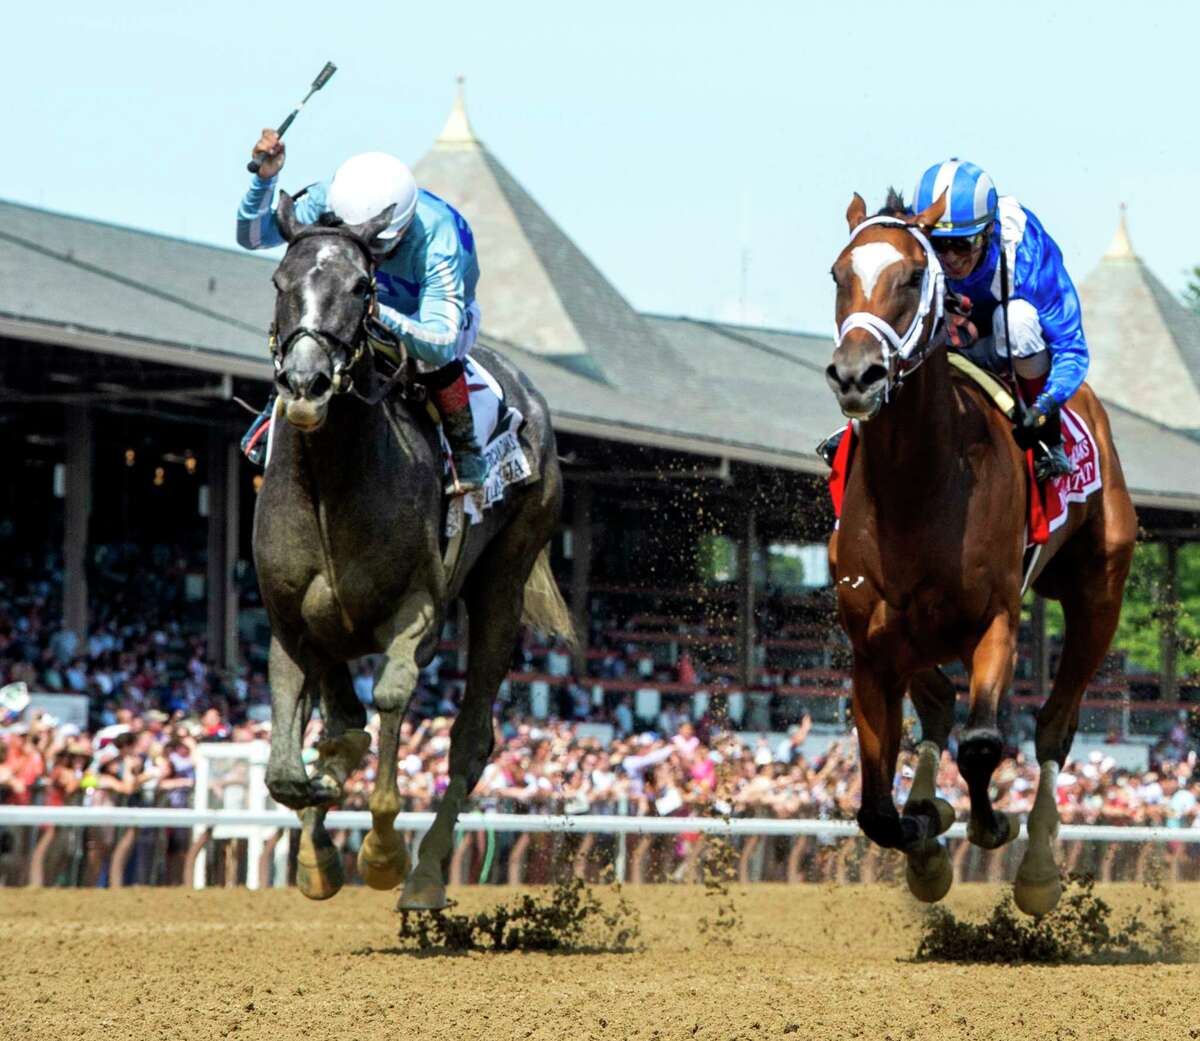 Malathaat, right, was handed her first loss by Maracuja in the Coaching Club American Oaks on July 24 at Saratoga. Malathaat will look to get back to her winning ways in the $600,000, Grade I Alabama on Saturday.